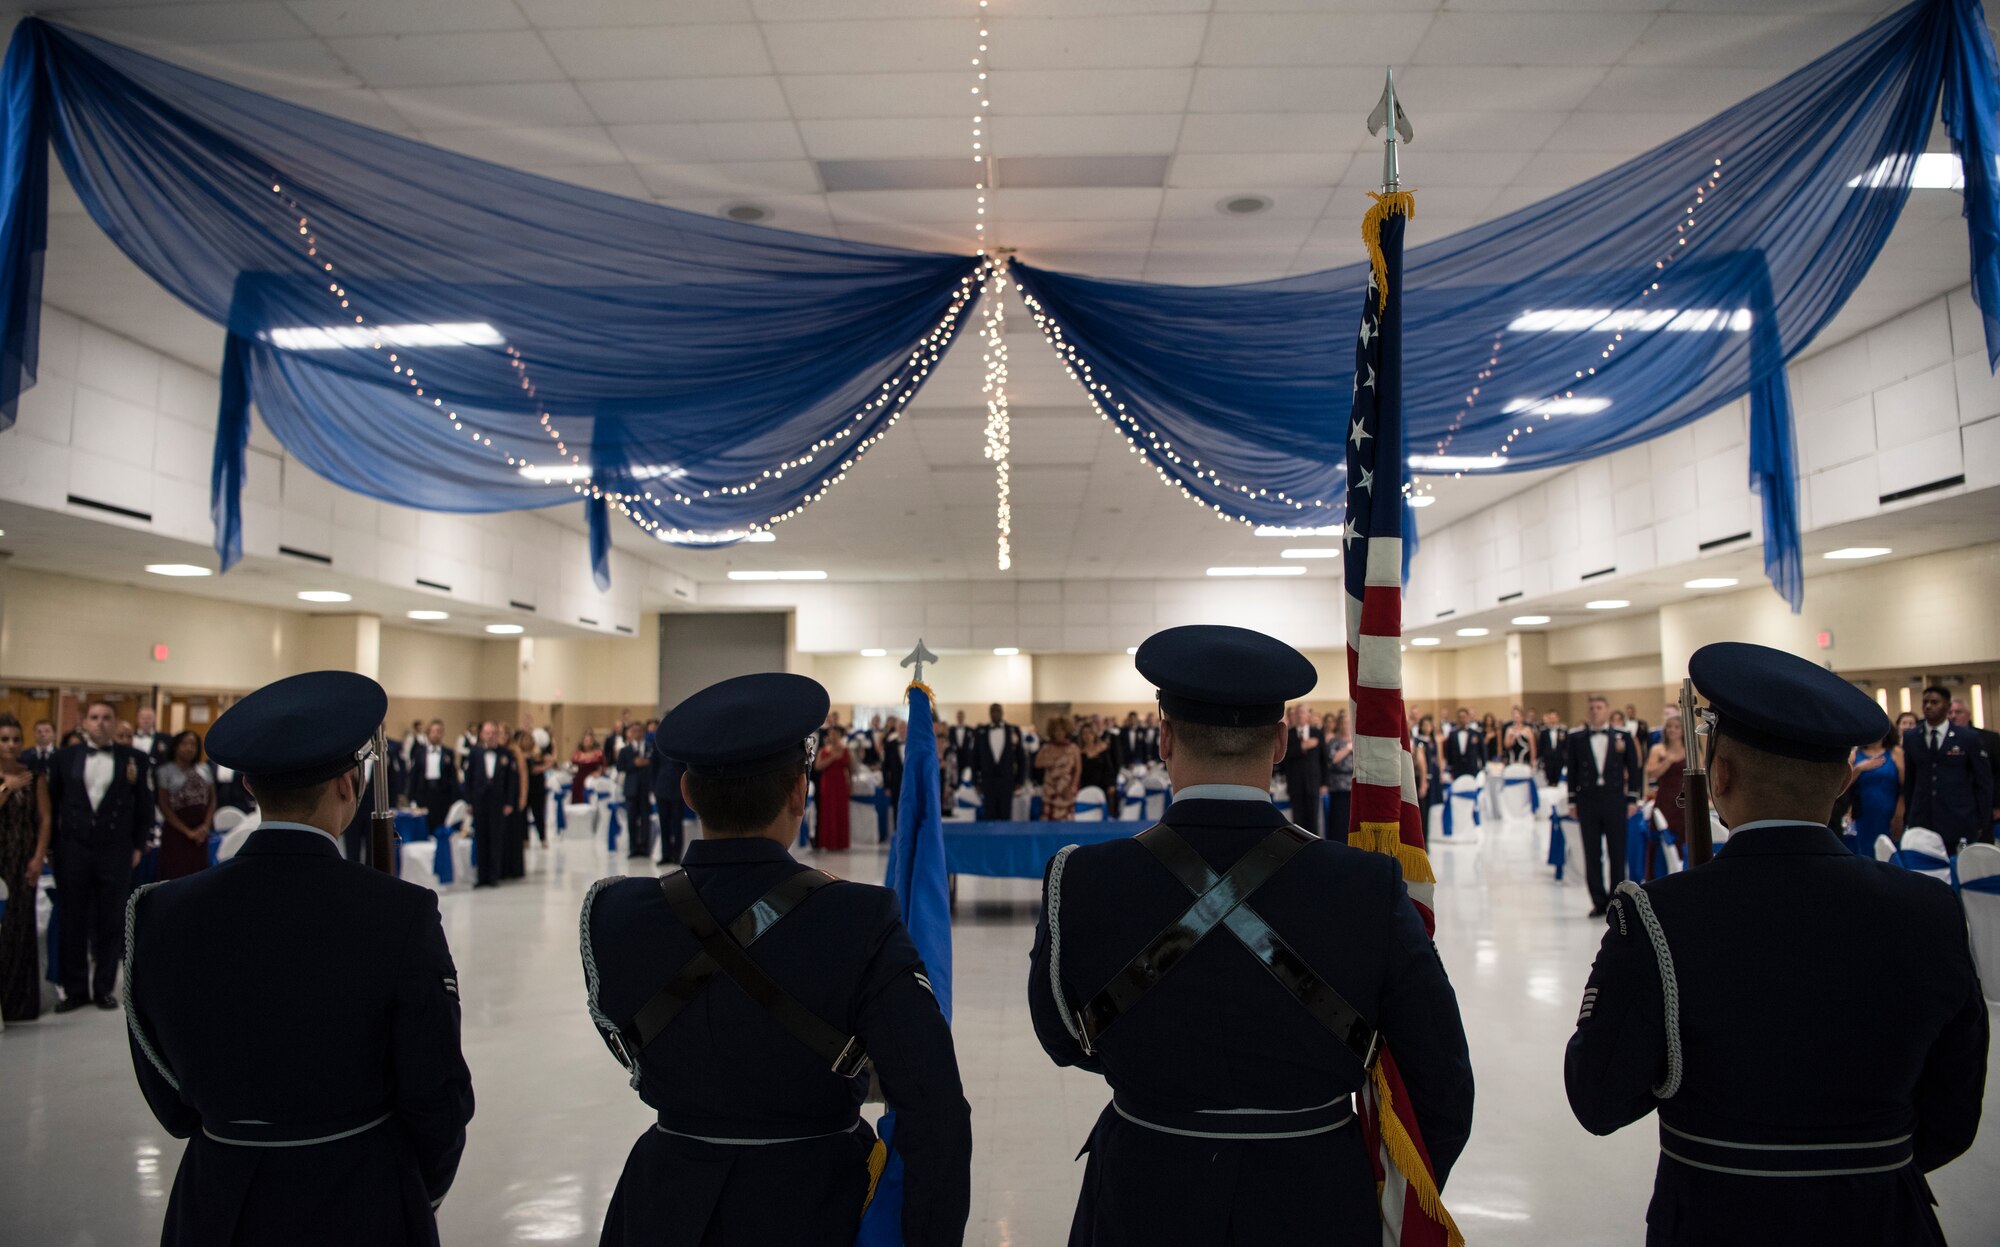 Laughlin’s Base Honor Guard posts the colors at Laughlin’s Air Force Ball in Del Rio, Texas, Sept. 13, 2019. Laughlin’s Air Force Ball this year celebrated the Air Force’s 72nd birthday, as well as the 47th year as the 47th Flying Training Wing. (U.S. Air Force photo by Staff Sgt. Benjamin N. Valmoja)